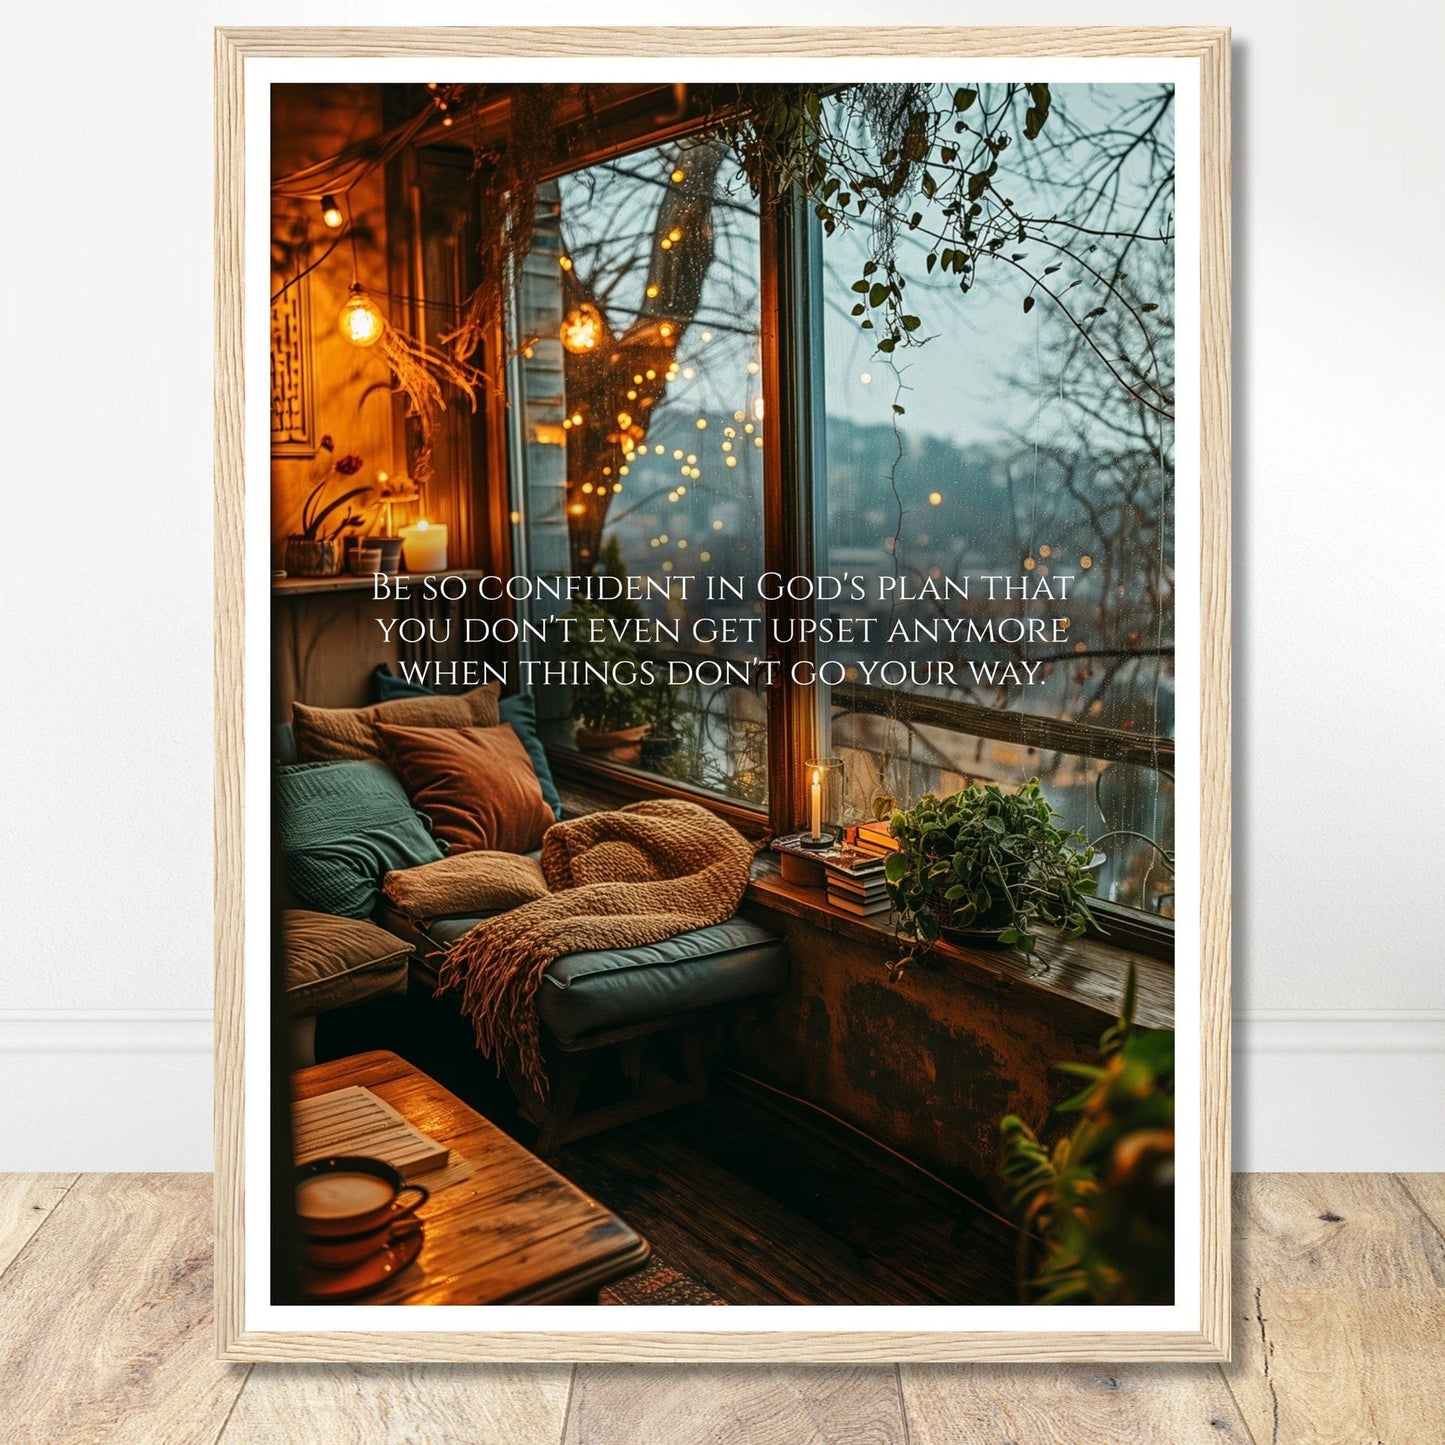 Coffee With My Father Print Material 45x60 cm / 18x24″ / Premium Matte Paper with Frame / Wood frame Be Confident In God's Plan - Customizable Christian Artwork